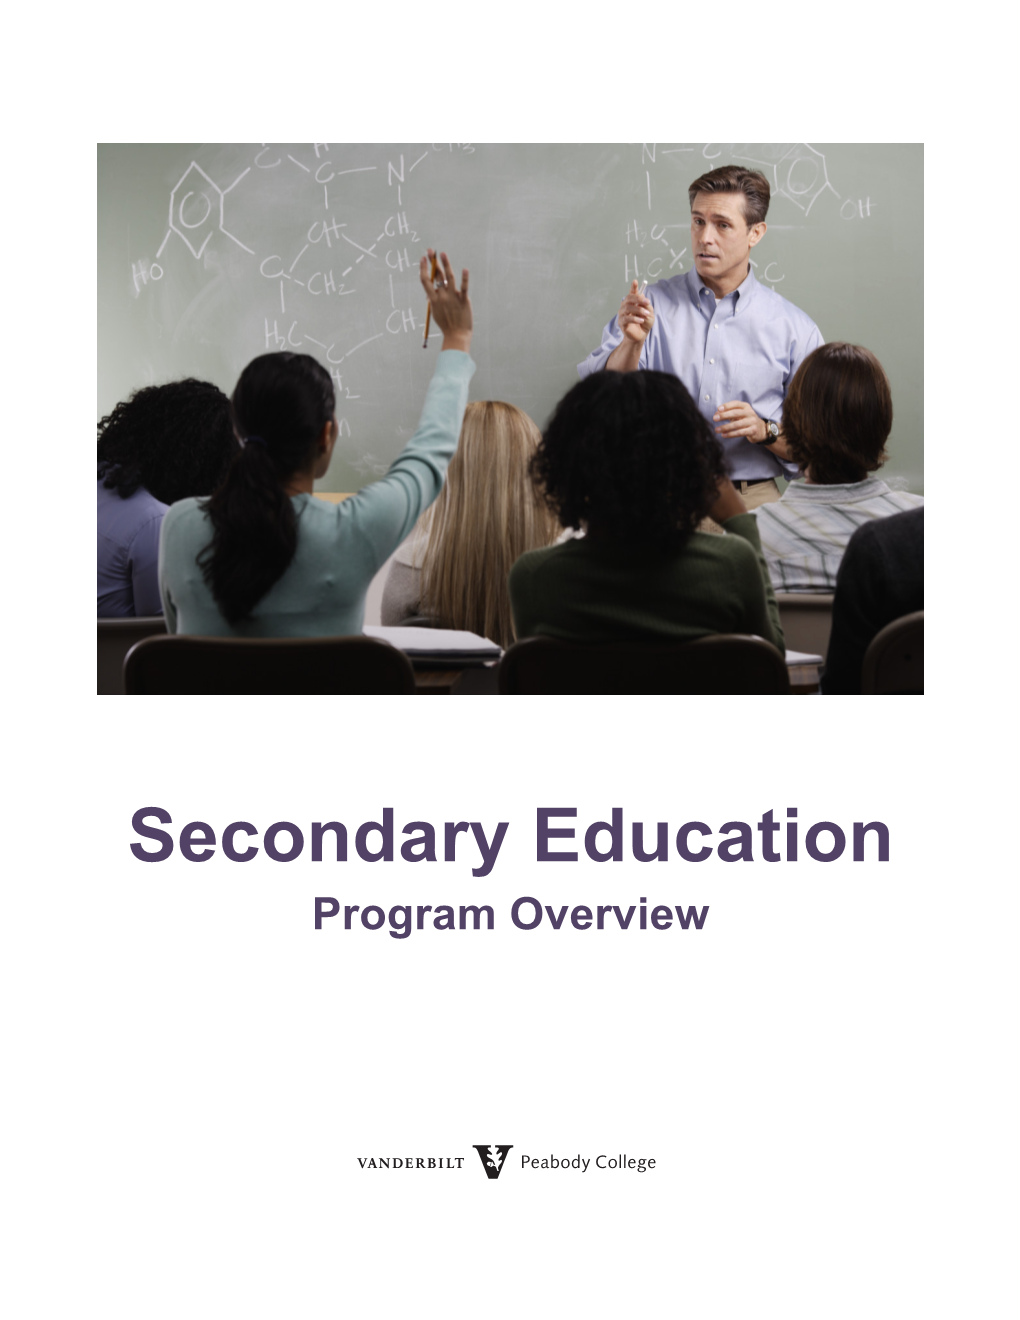 Secondary Education Program Overview